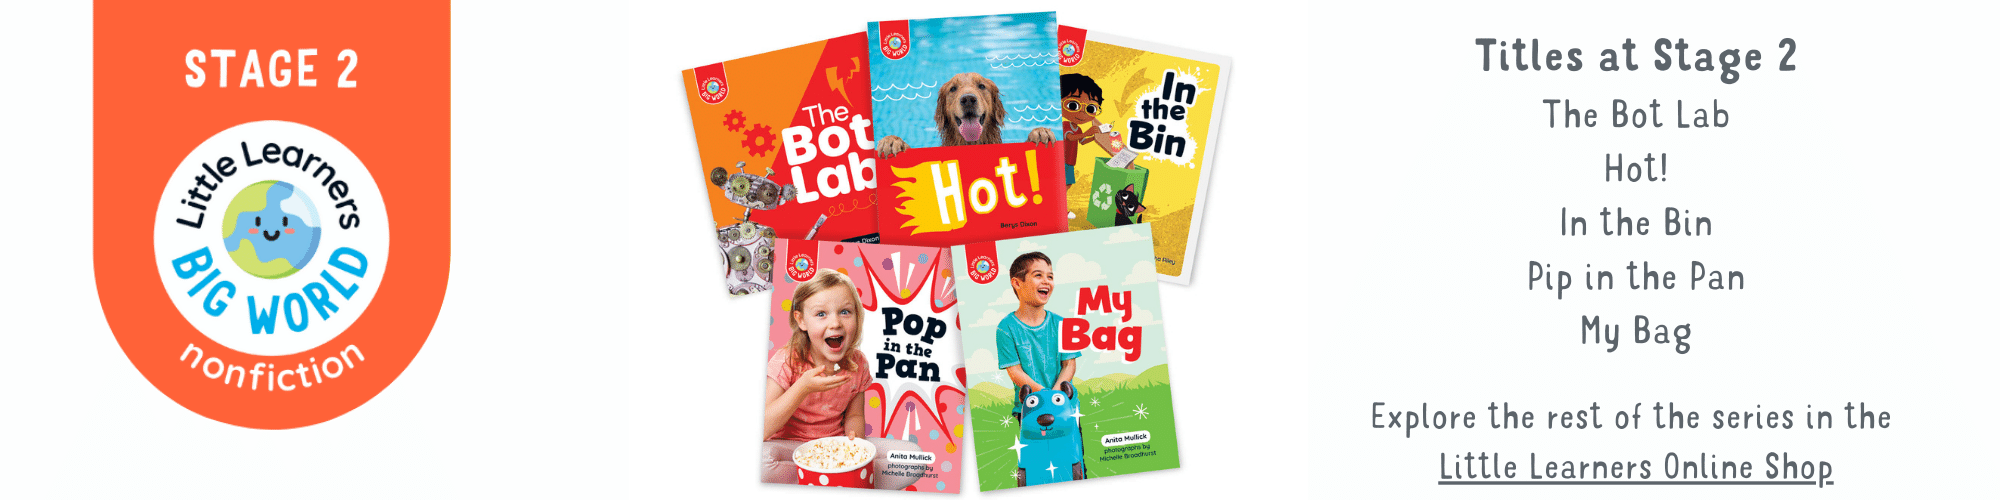 Little Learners, Big World logo and Stage 2 book covers